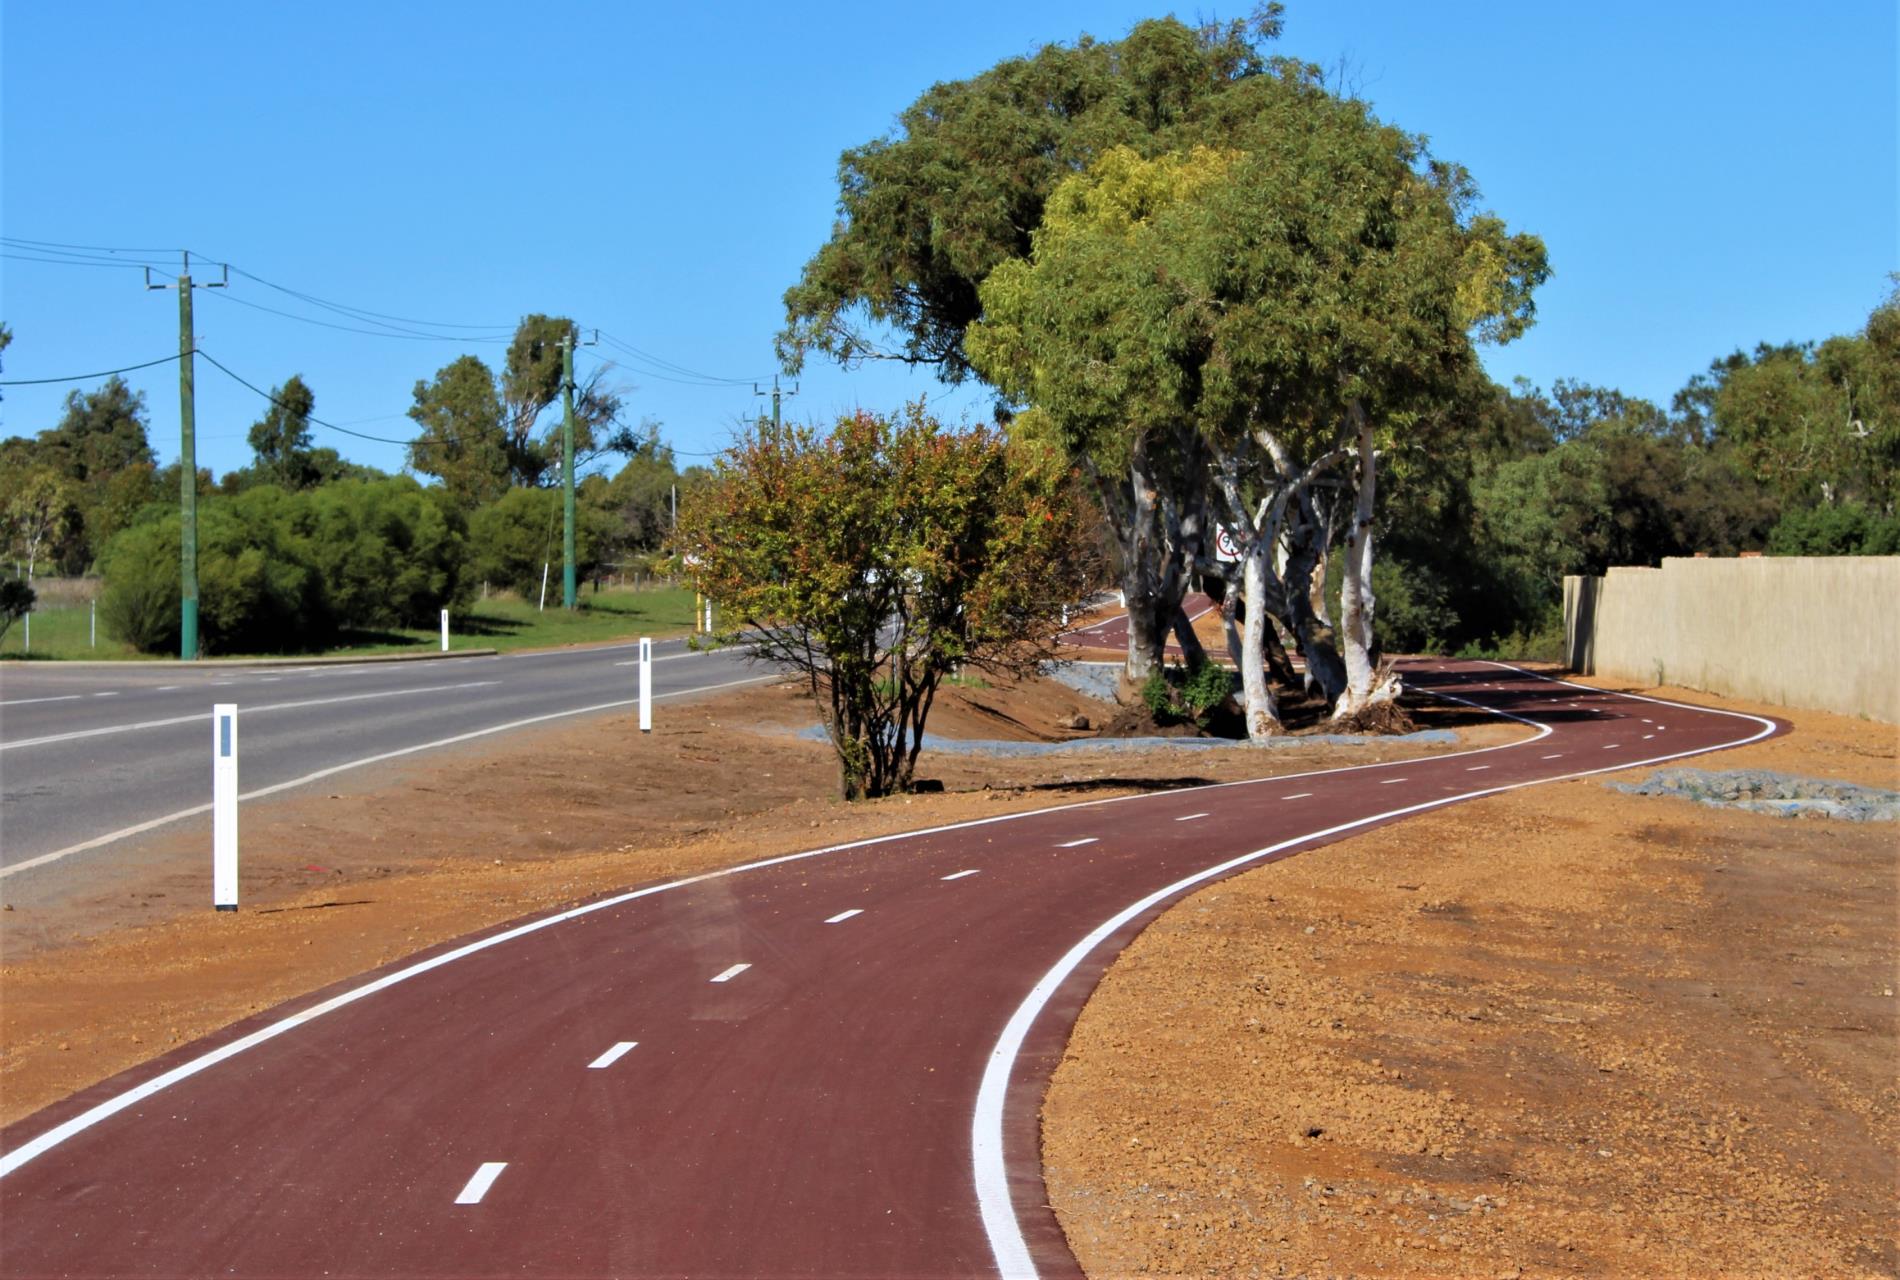 hapman Road Shared Path south of Glenfield Beach Drive.